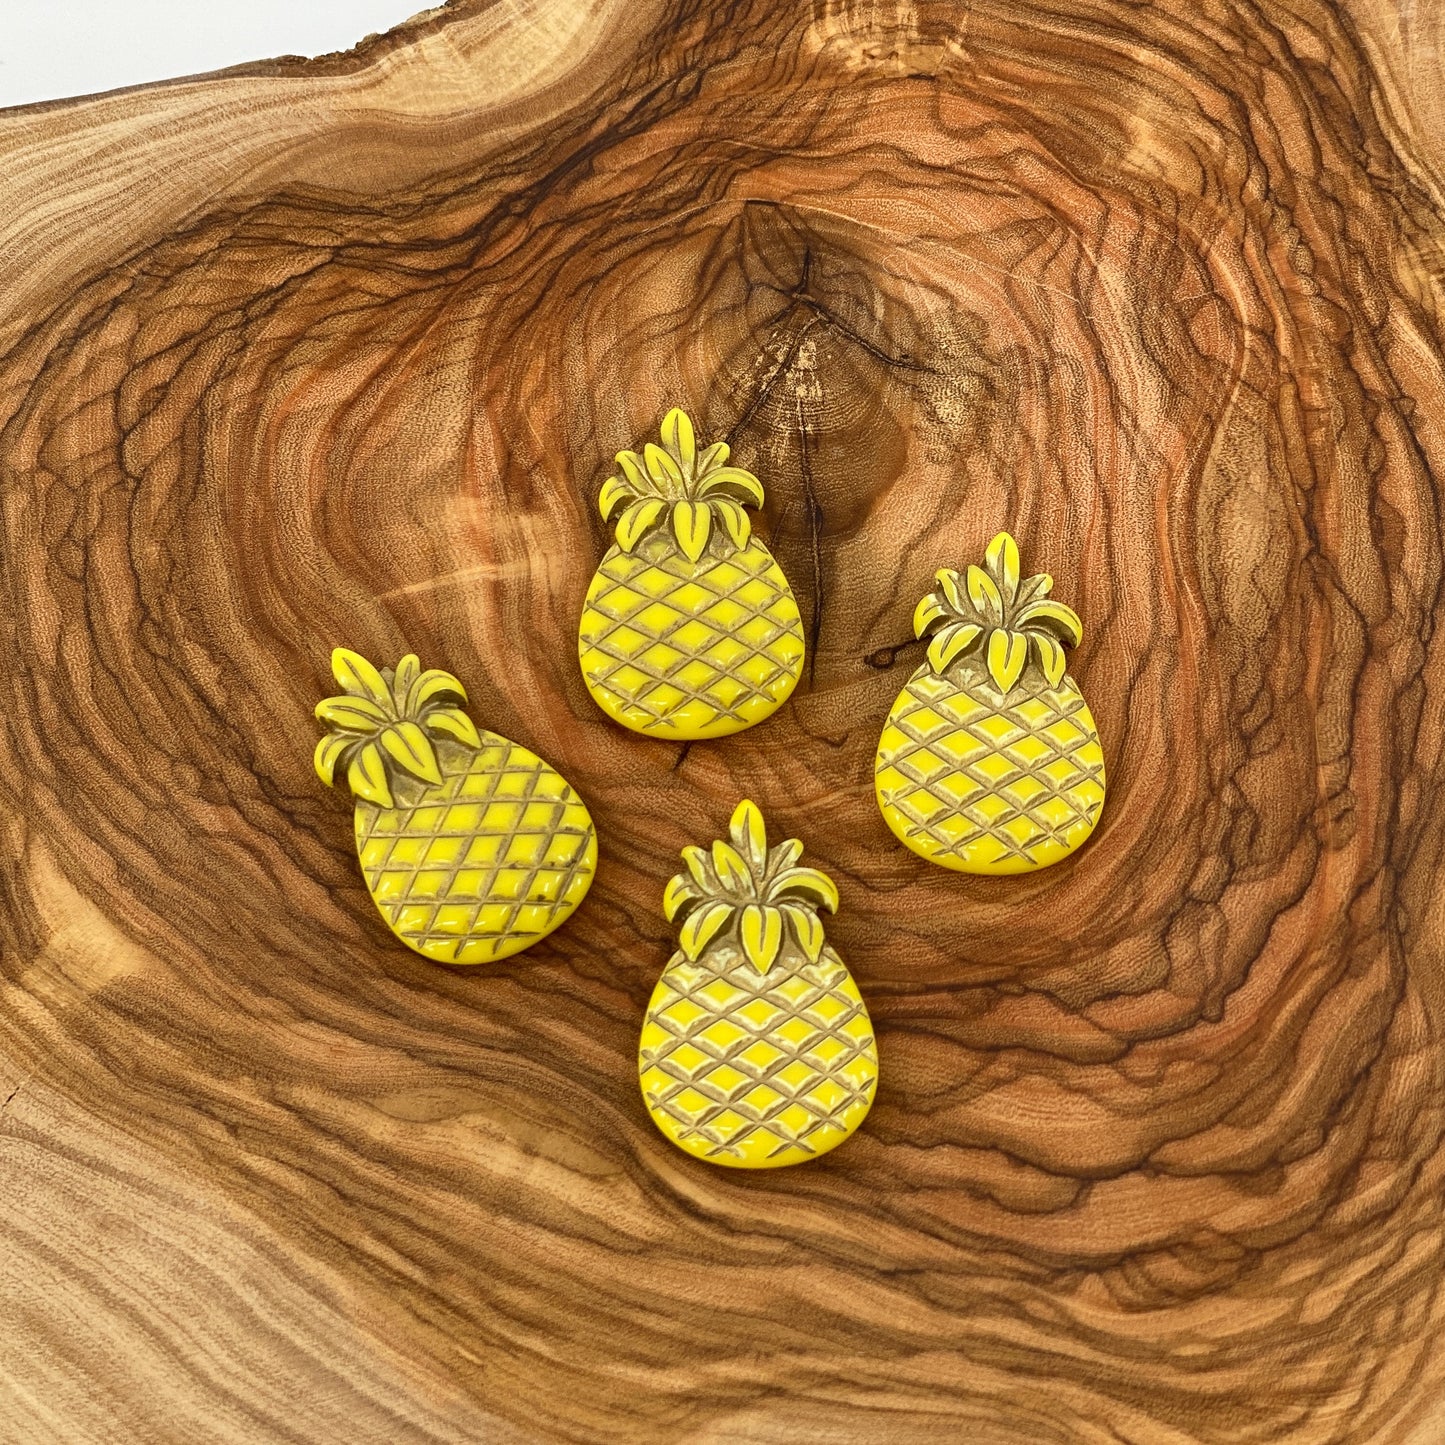 Resin Pineapple Beads With Gold Detail - 2 pc.